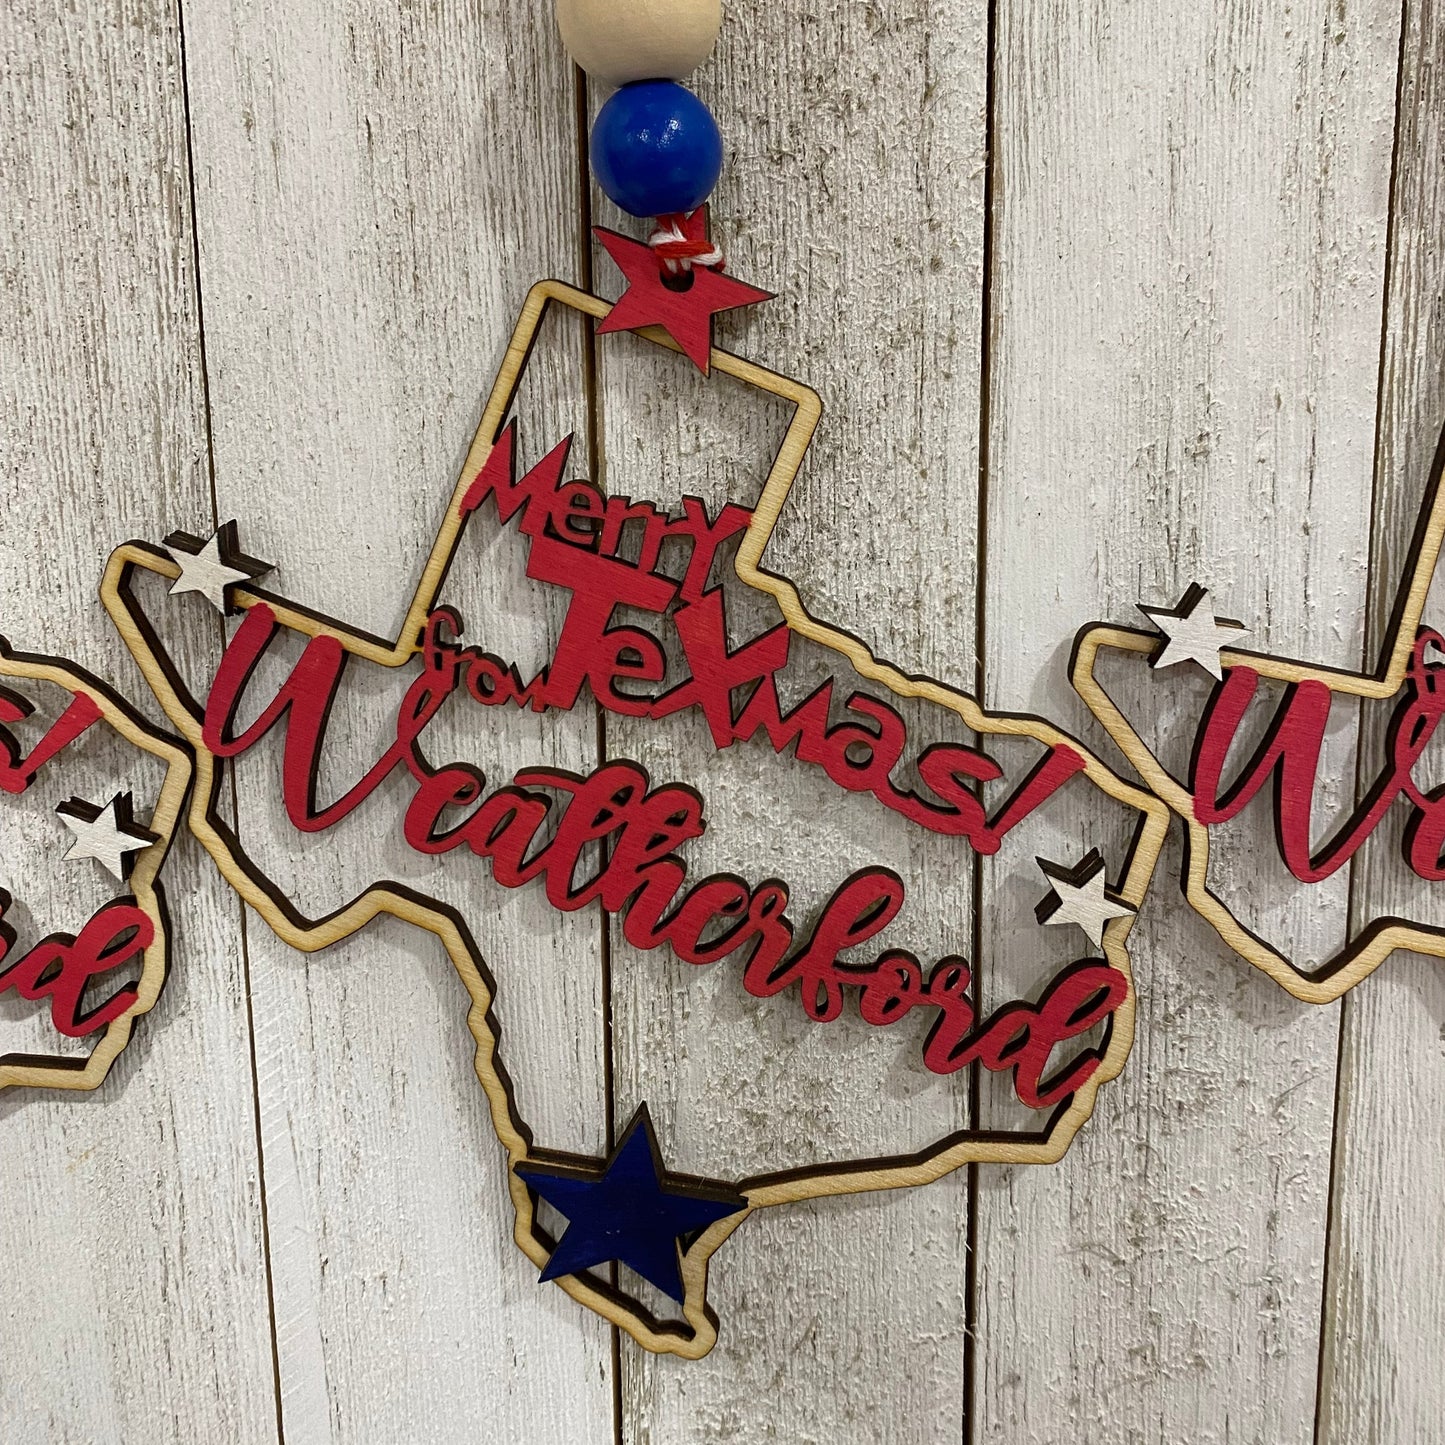 Merry teXmas from Weatherford Ornament